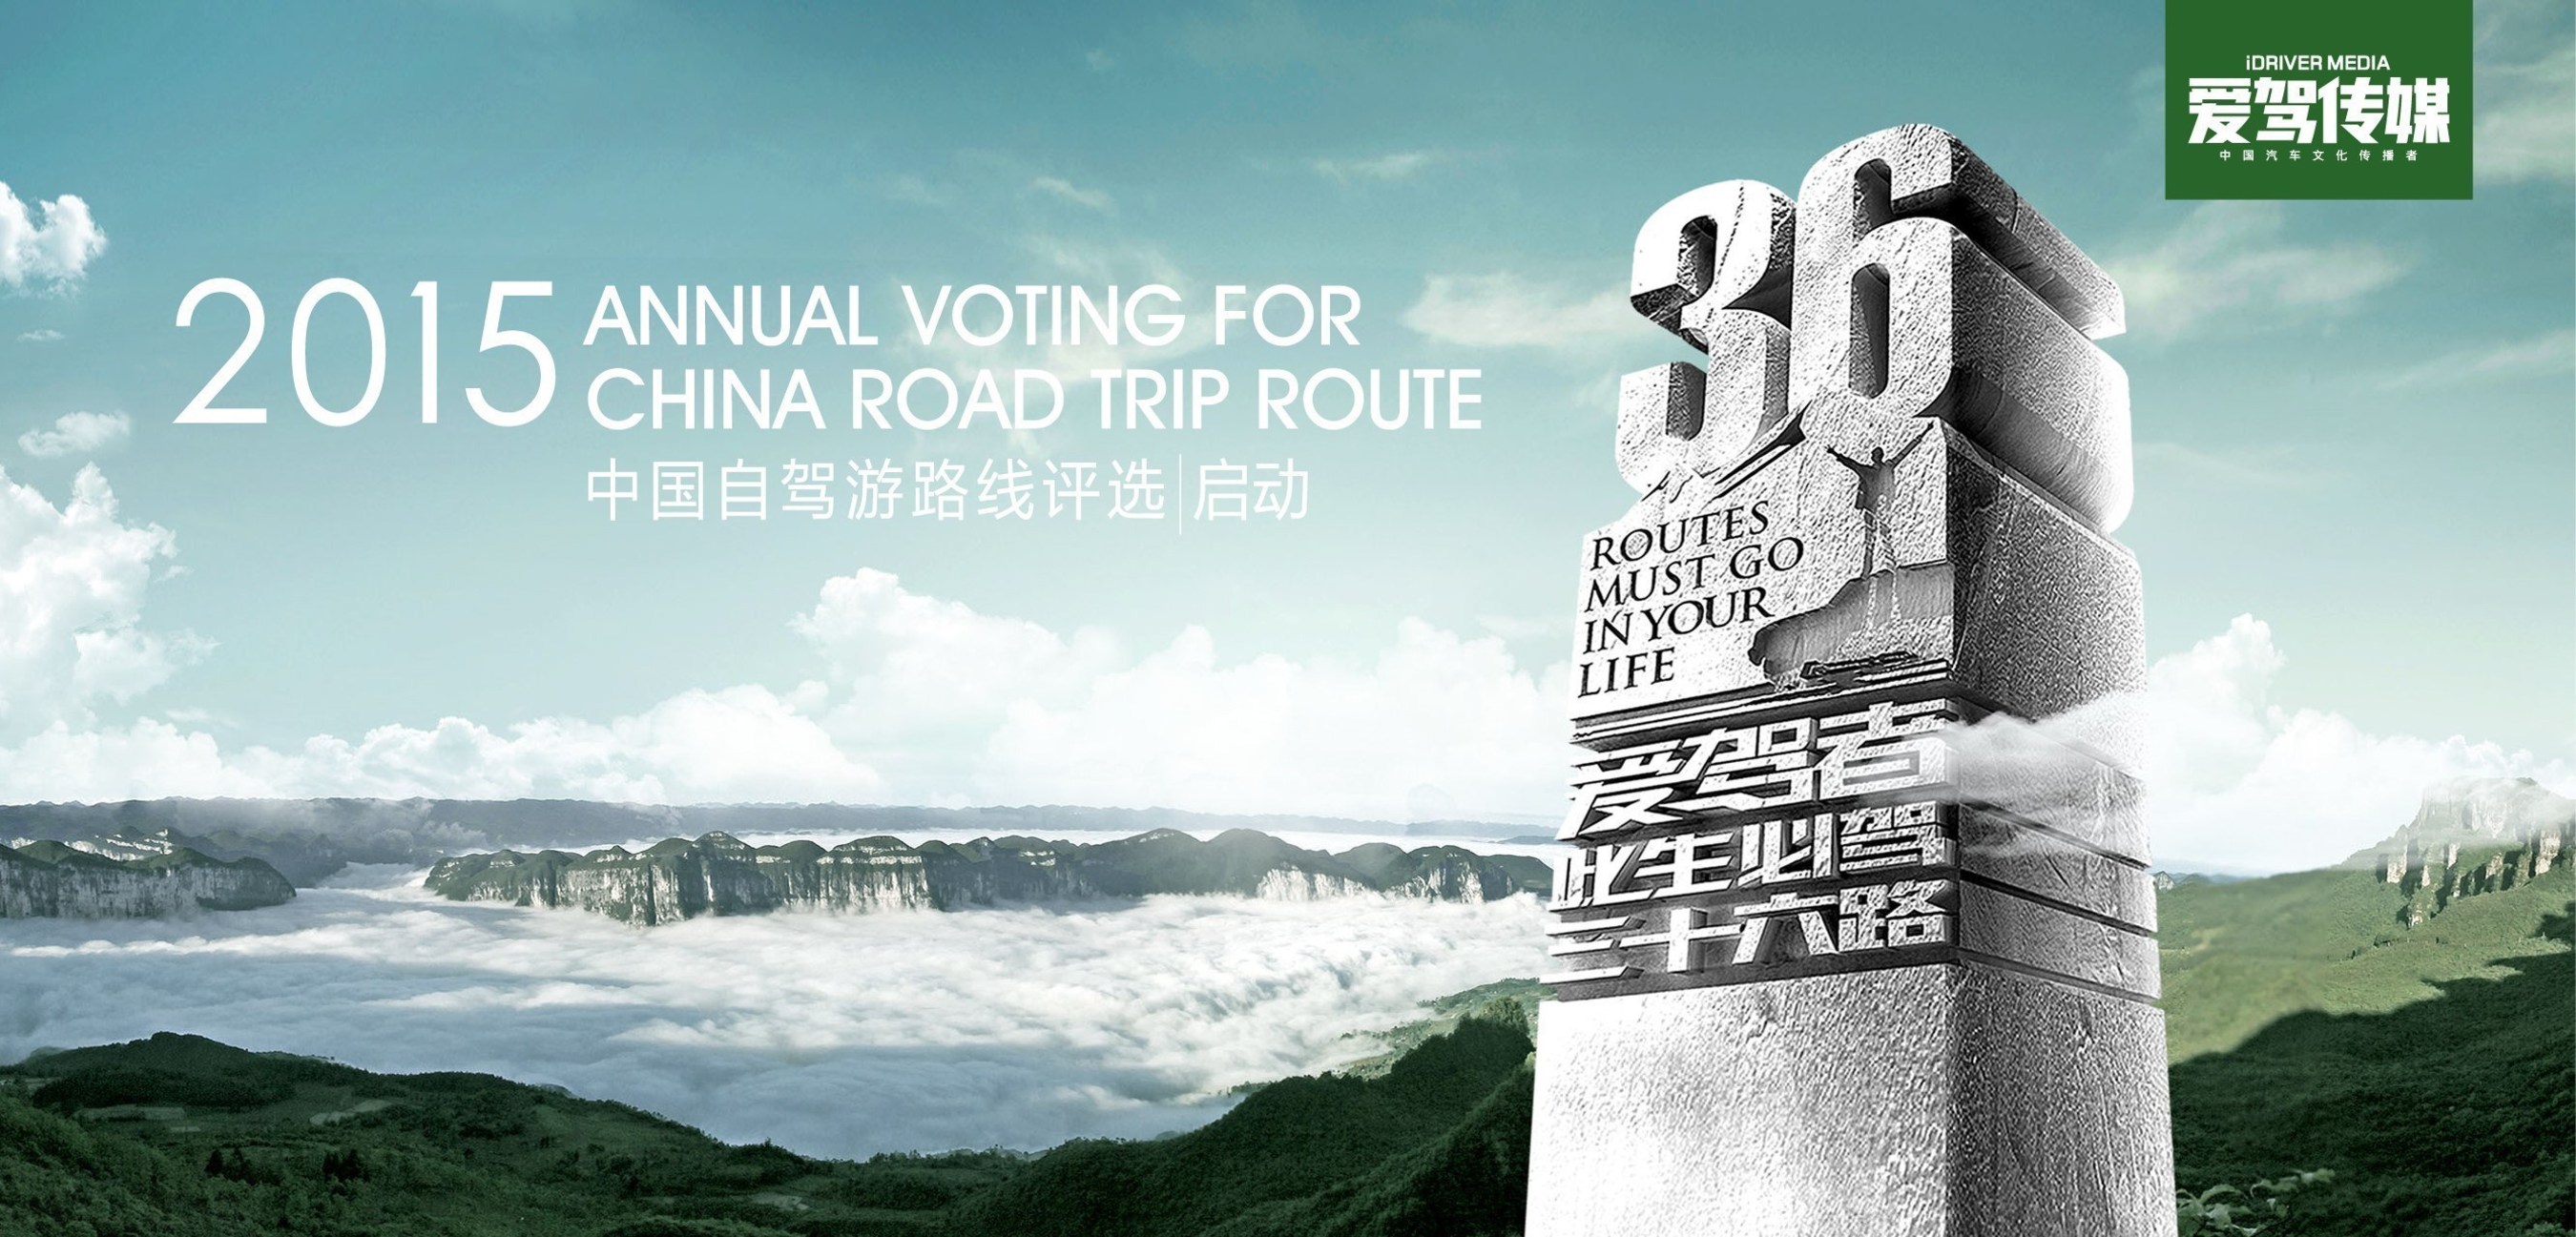 The annual voting for China Road Trip Routes was launched on June 6, 2015 at Hubei Province’s Enshi Grand Canyon, known as China’s most beautiful canyon.